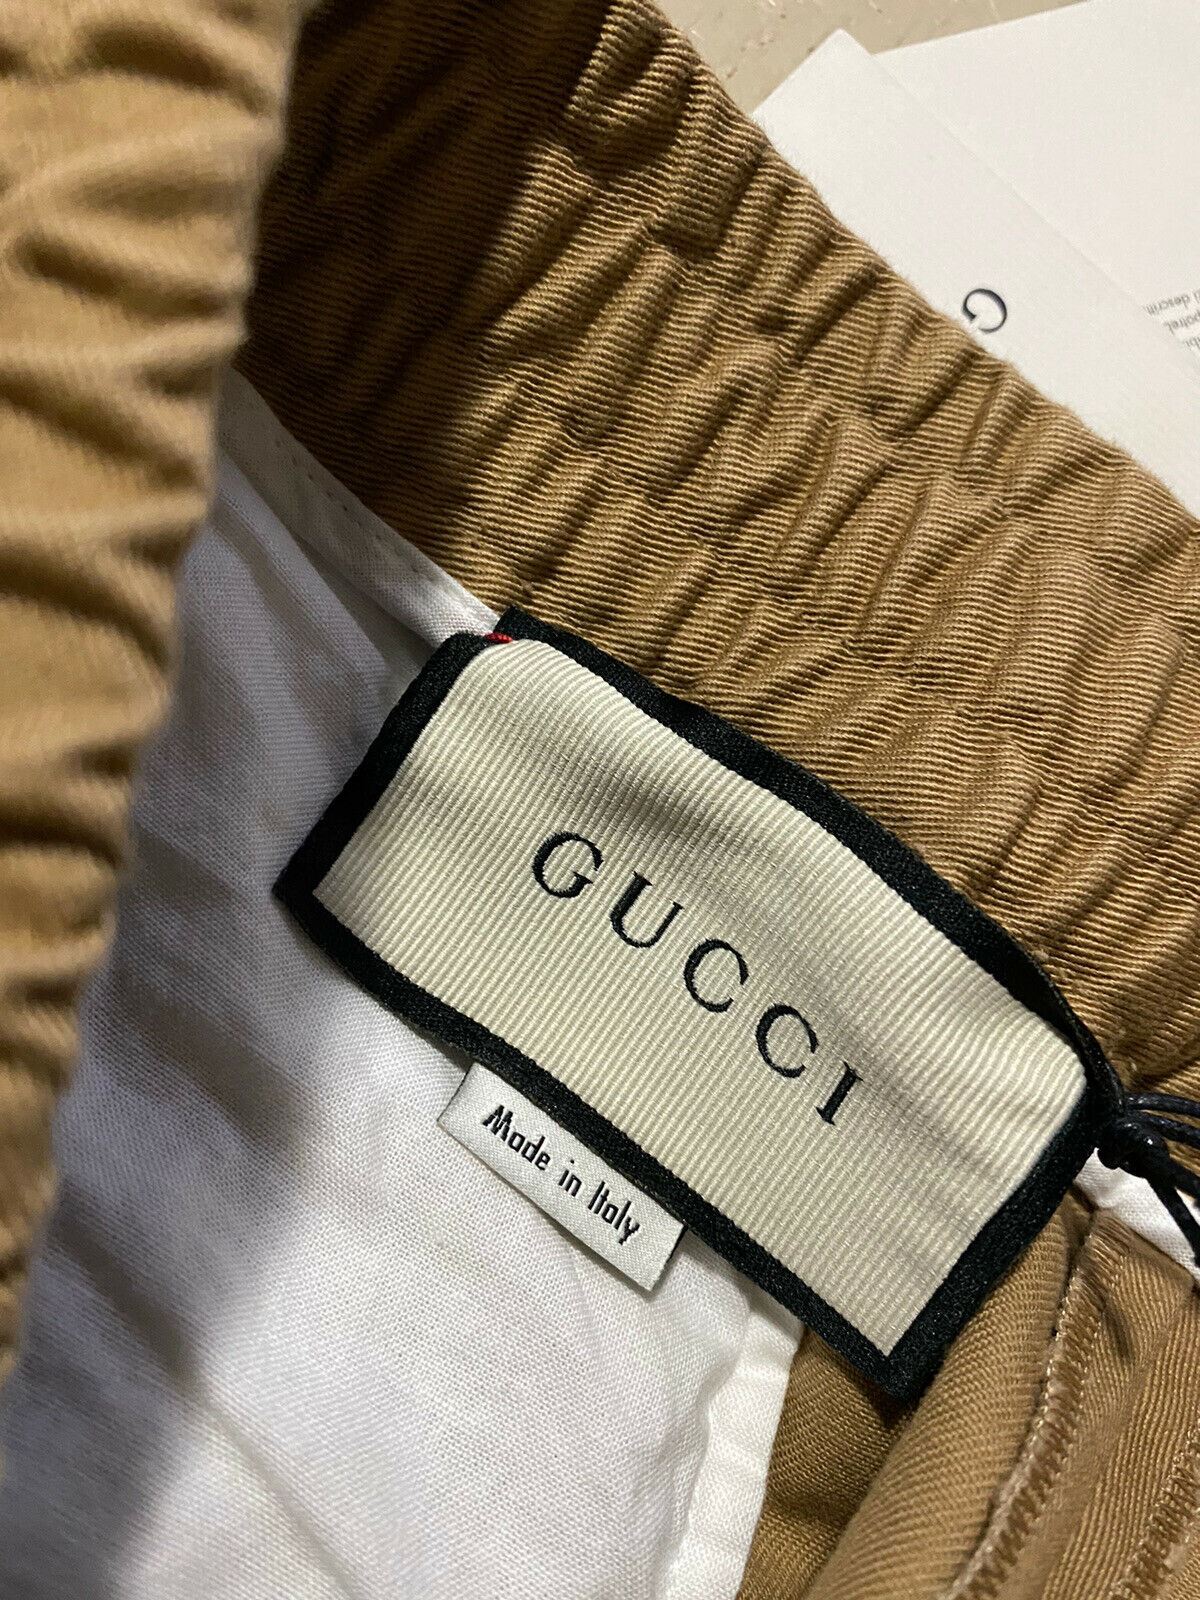 New $1100 Gucci Men Military Cotton Jegging  Pants Brown 34 US ( 50 Eu ) Italy